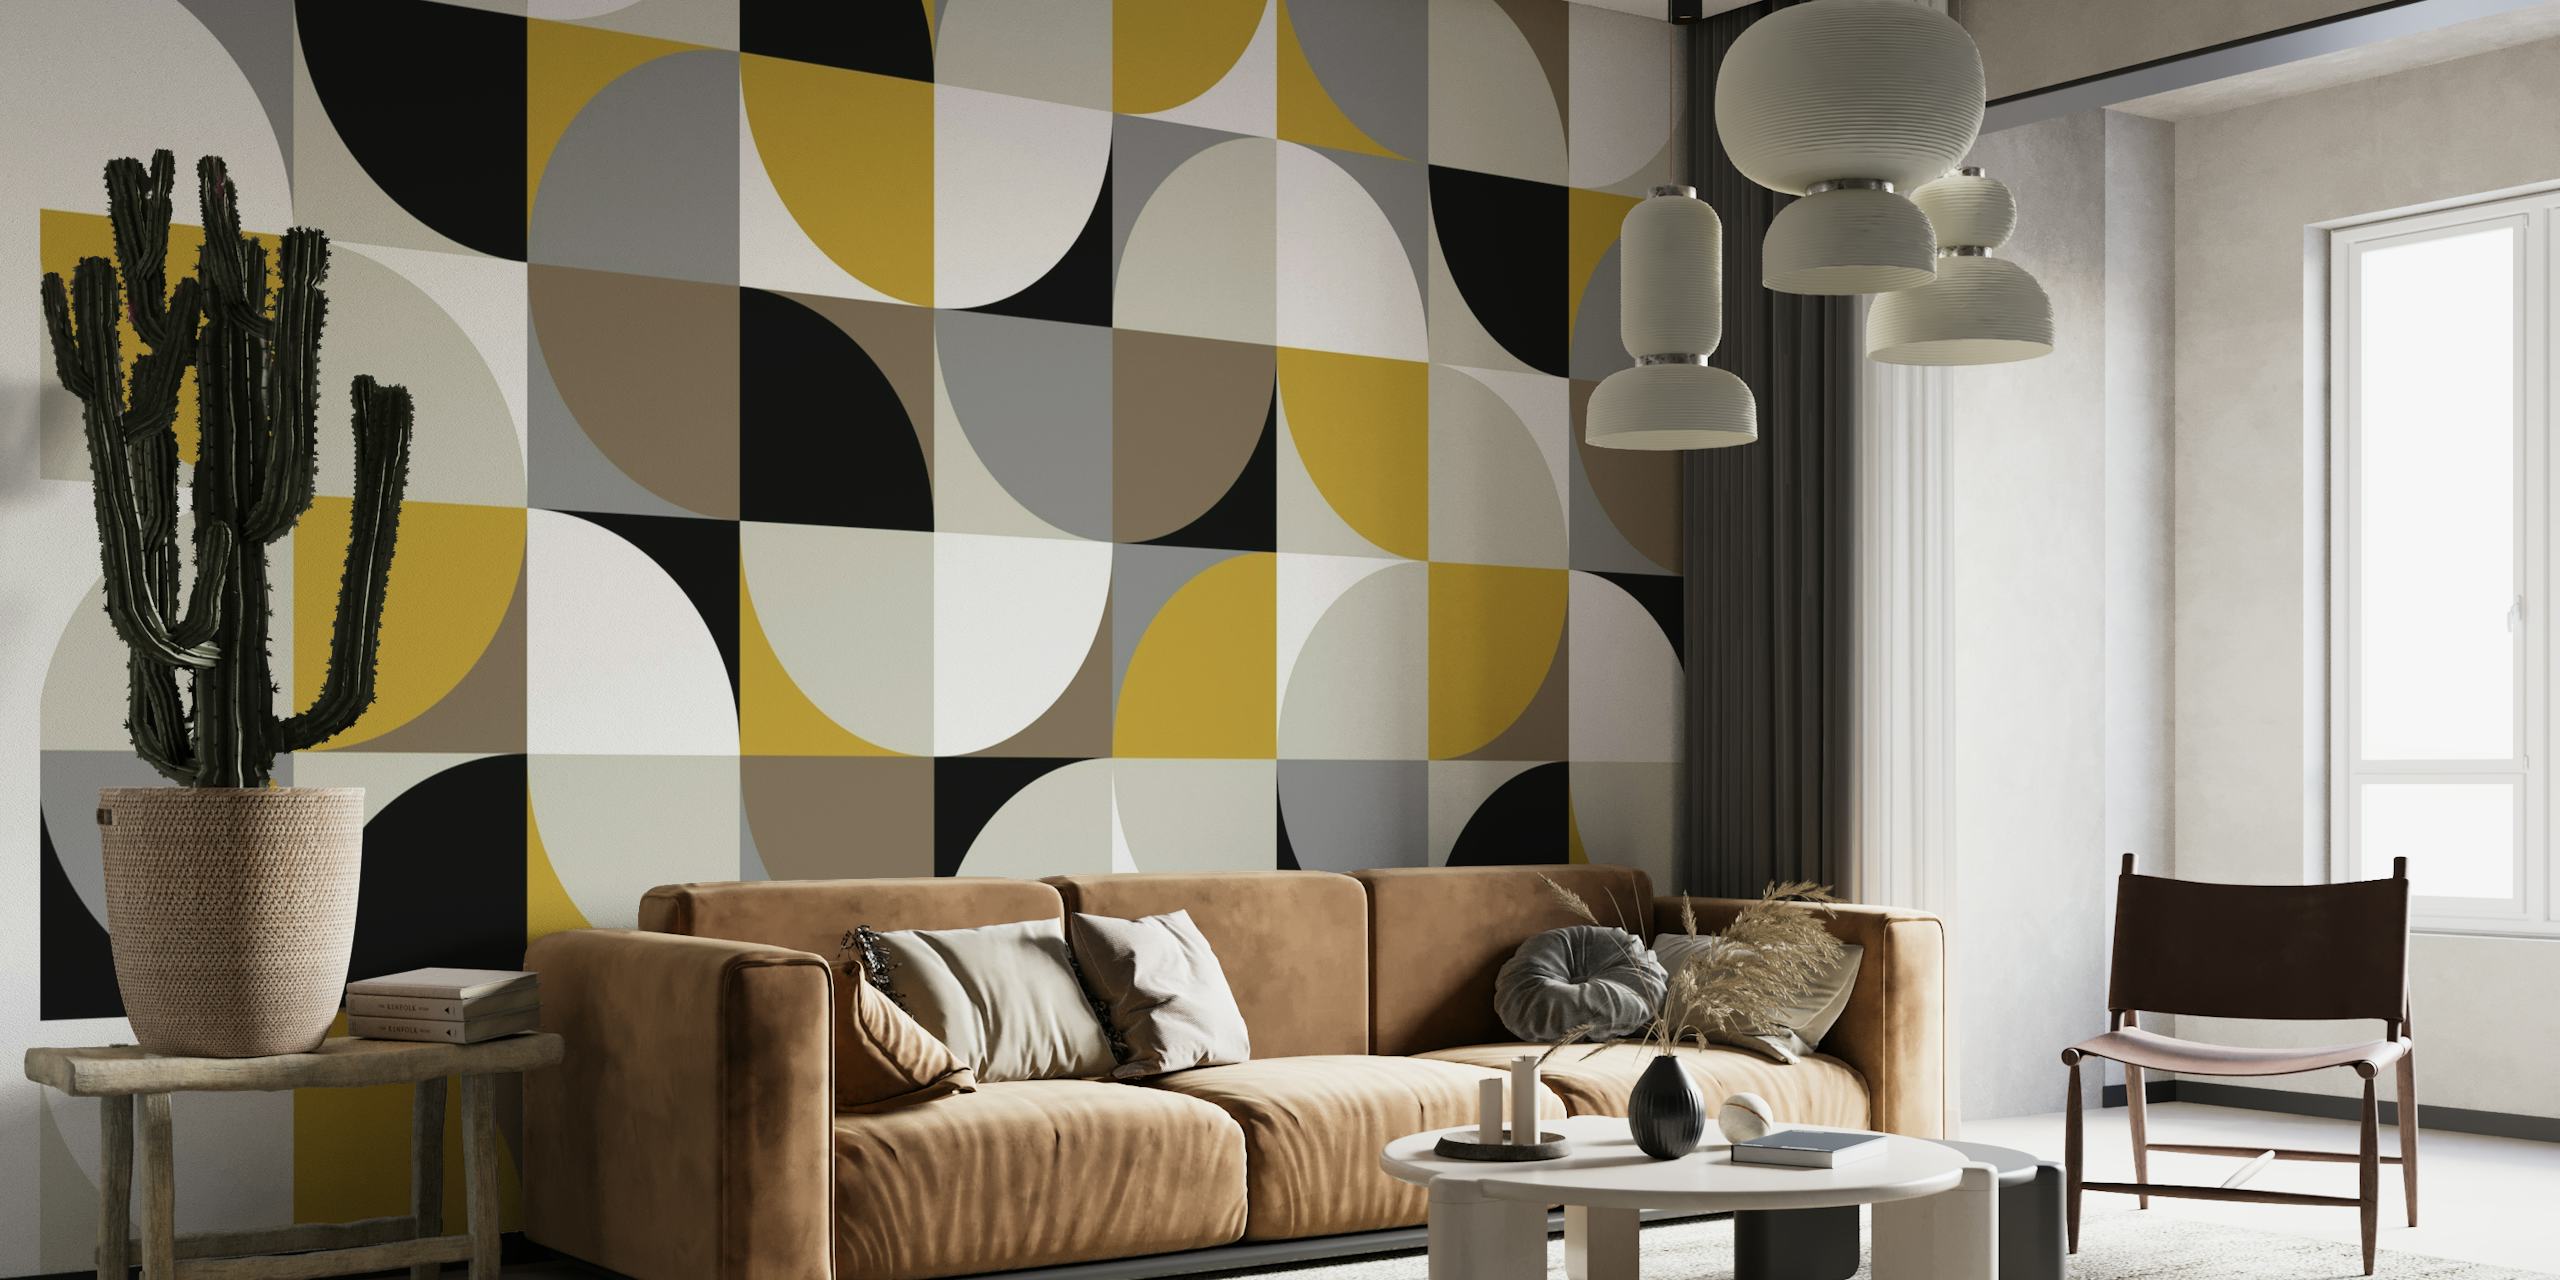 Retro mod squares design in black, white, grey, and gold for a wall mural